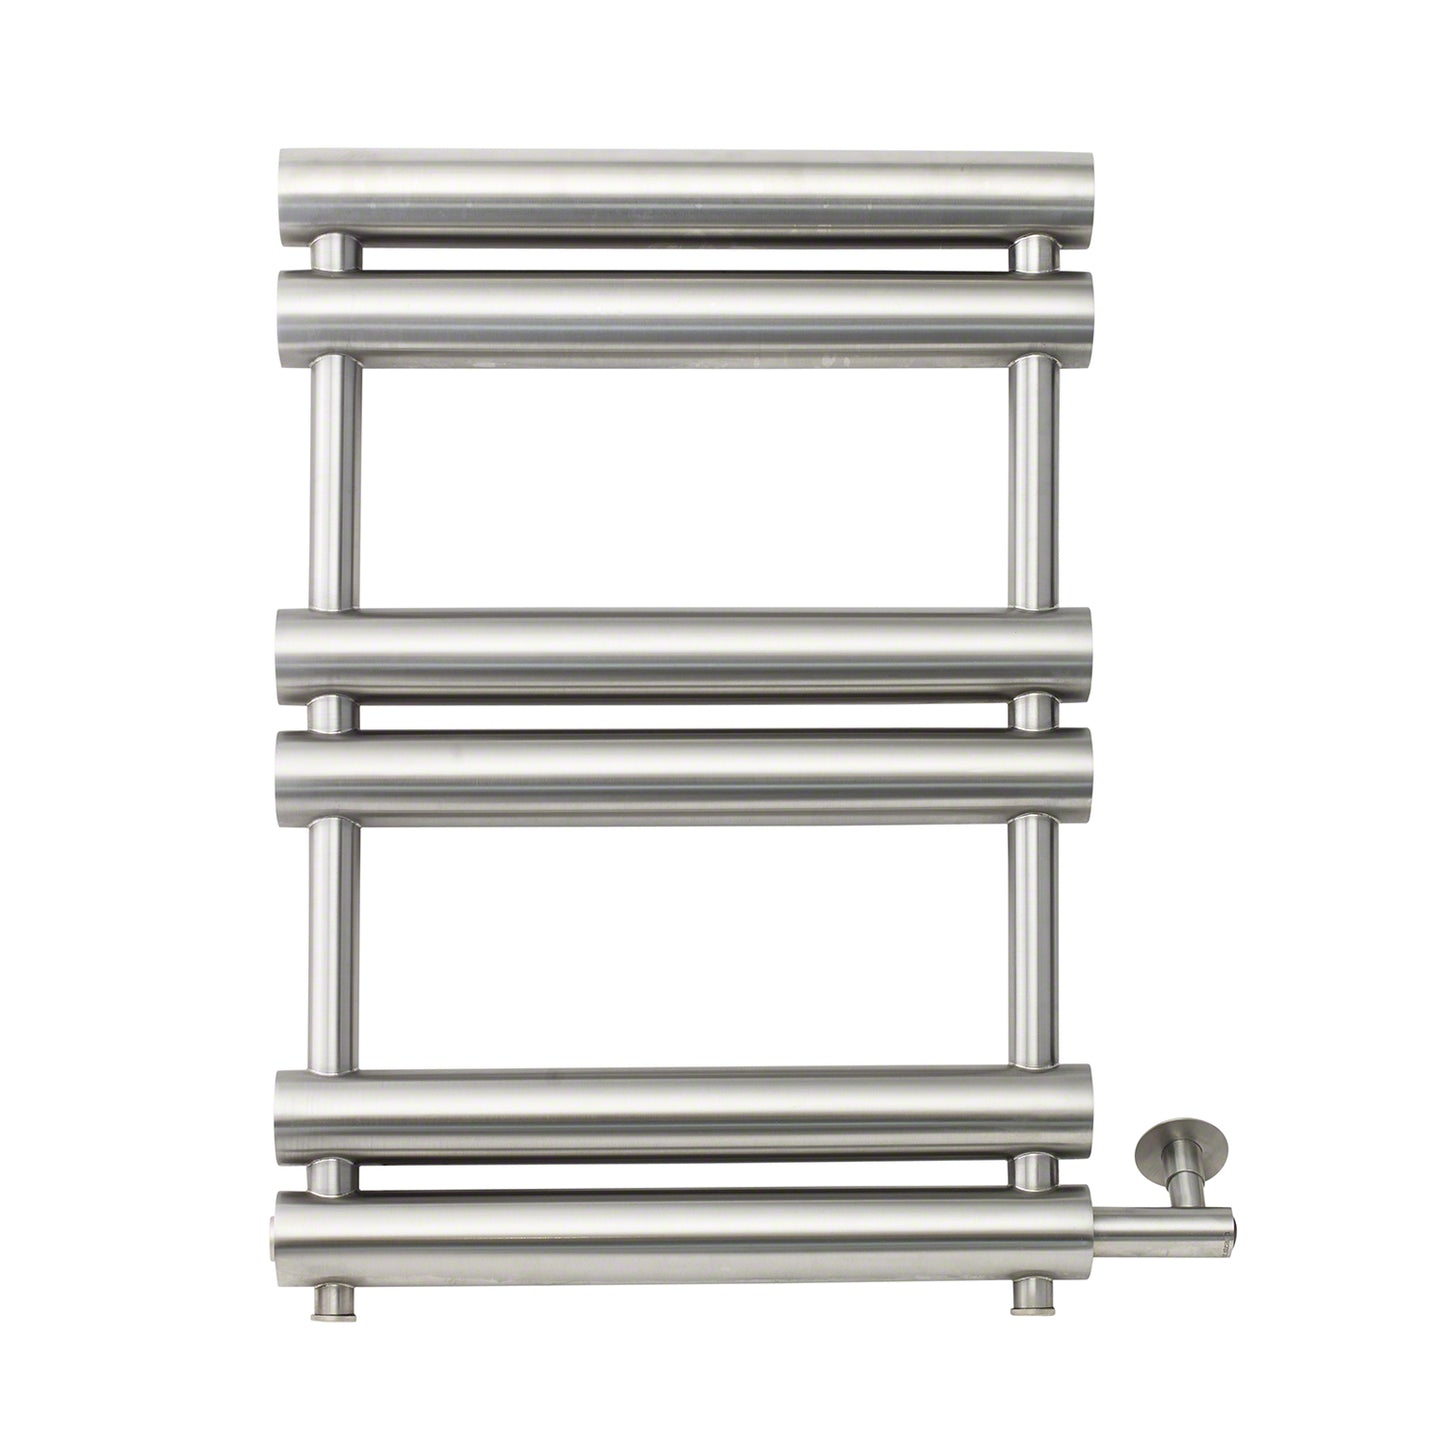 WX27 6-Bar Wall Mounted Electric Towel Warmer with Digital Timer in Stainless Steel Brushed